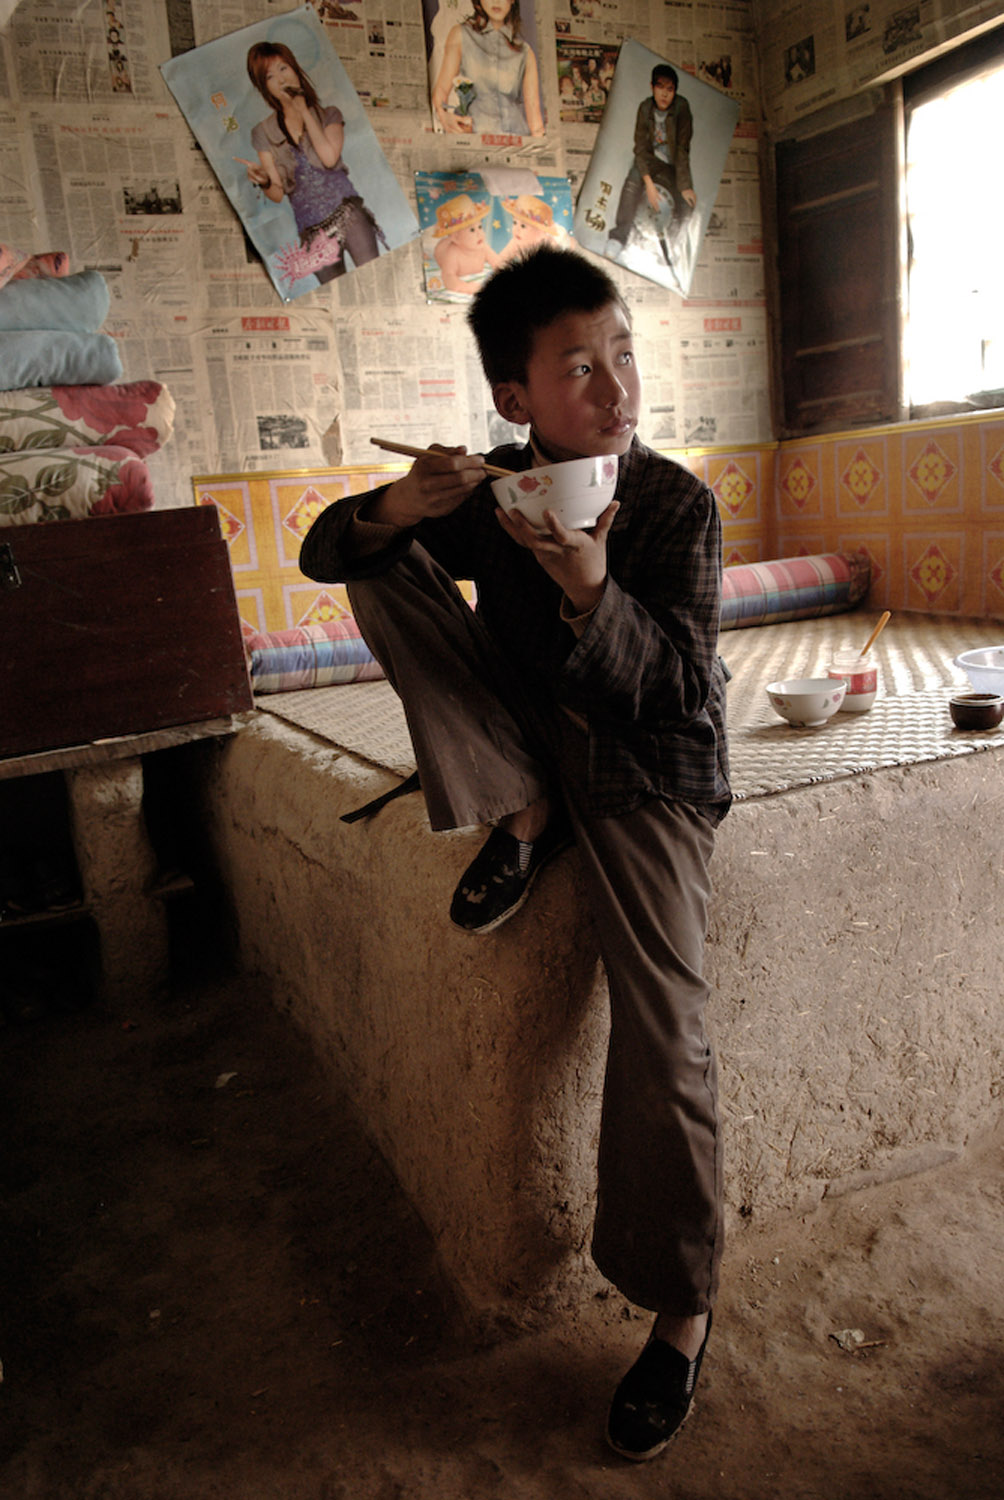   Liu Wei, an orphan, eating a bowl of noodles at his grandma's who struggles to support him.  